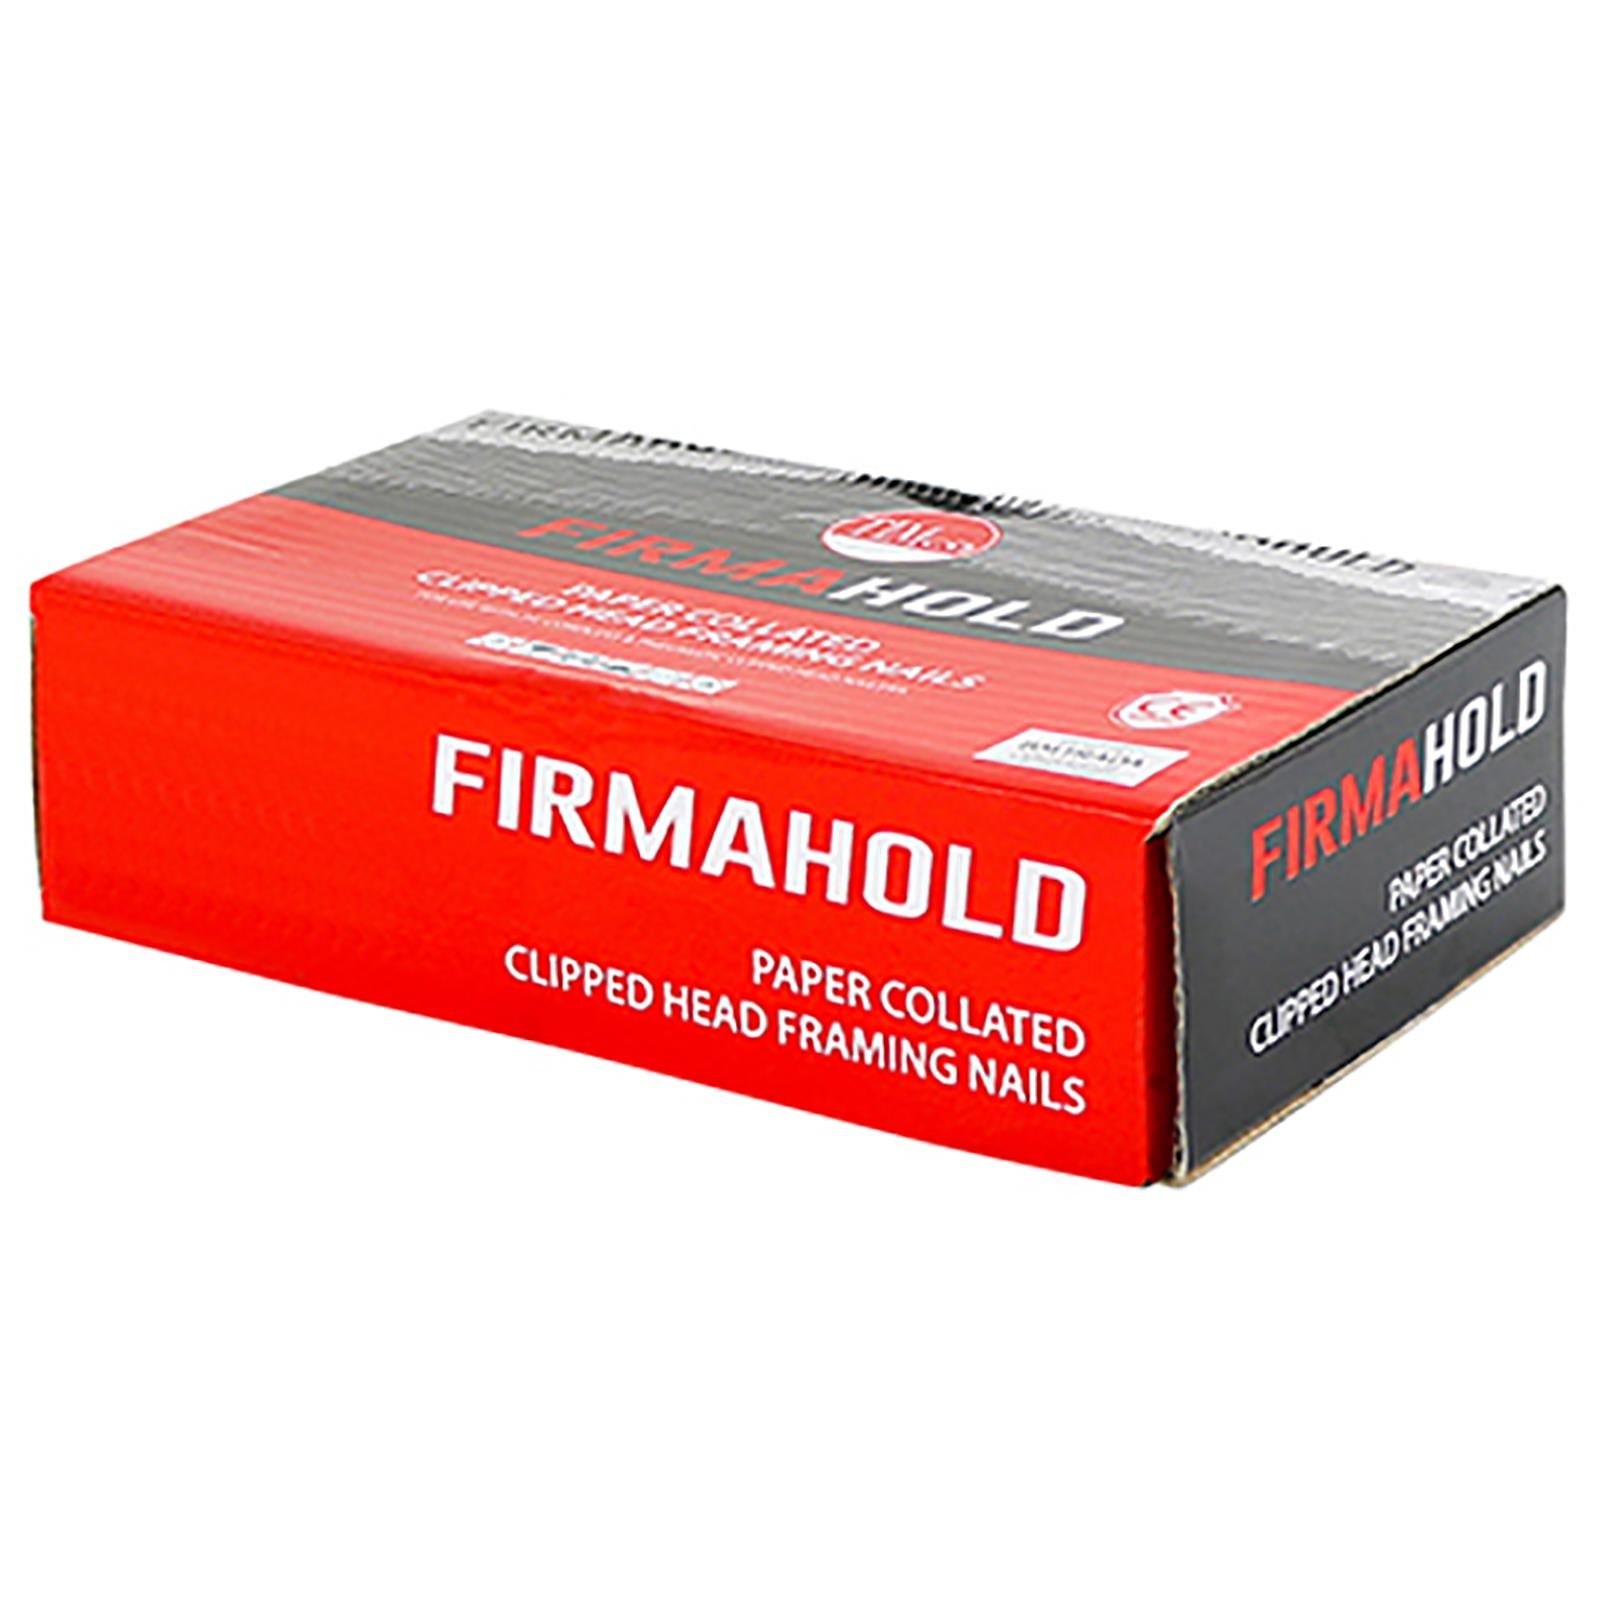 TIMCO FirmaHold Clipped Head Collated Nails Retail Pack without Gas Carbon Steel